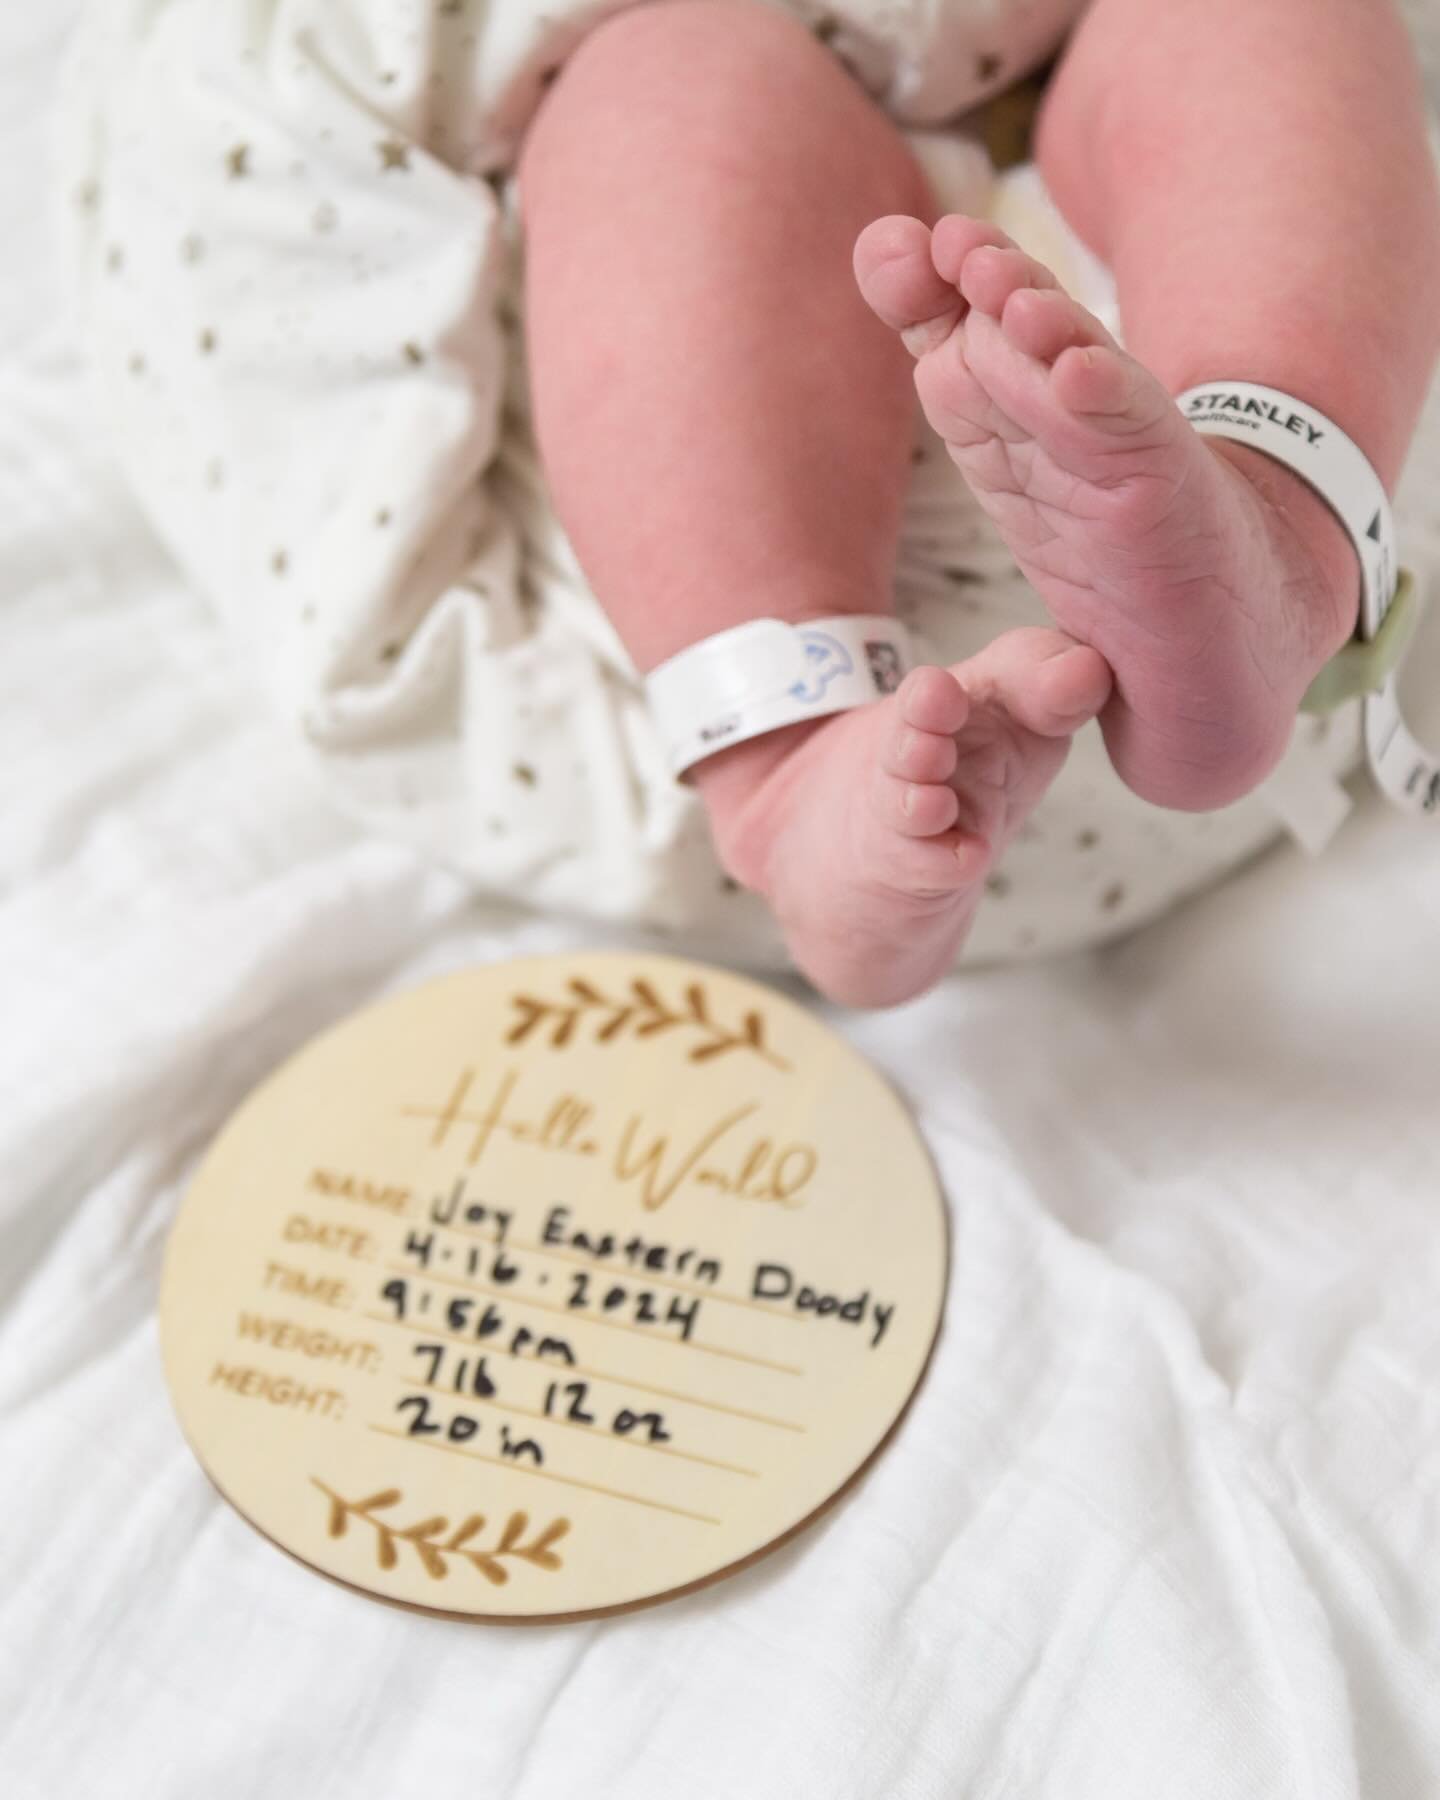 ✨JOY!✨
She&rsquo;s here! Our family is complete 🥹🌸
Joy Eastern Doody arrived in perfect divine timing at 9:56pm PST on April 16, 2024.

🔥 Aries ☼
☀️ Leo ☾ 
🦂 Scorpio &uarr; at 29&deg;

Our tiny angel of light was born in two steady pushes to Gaya